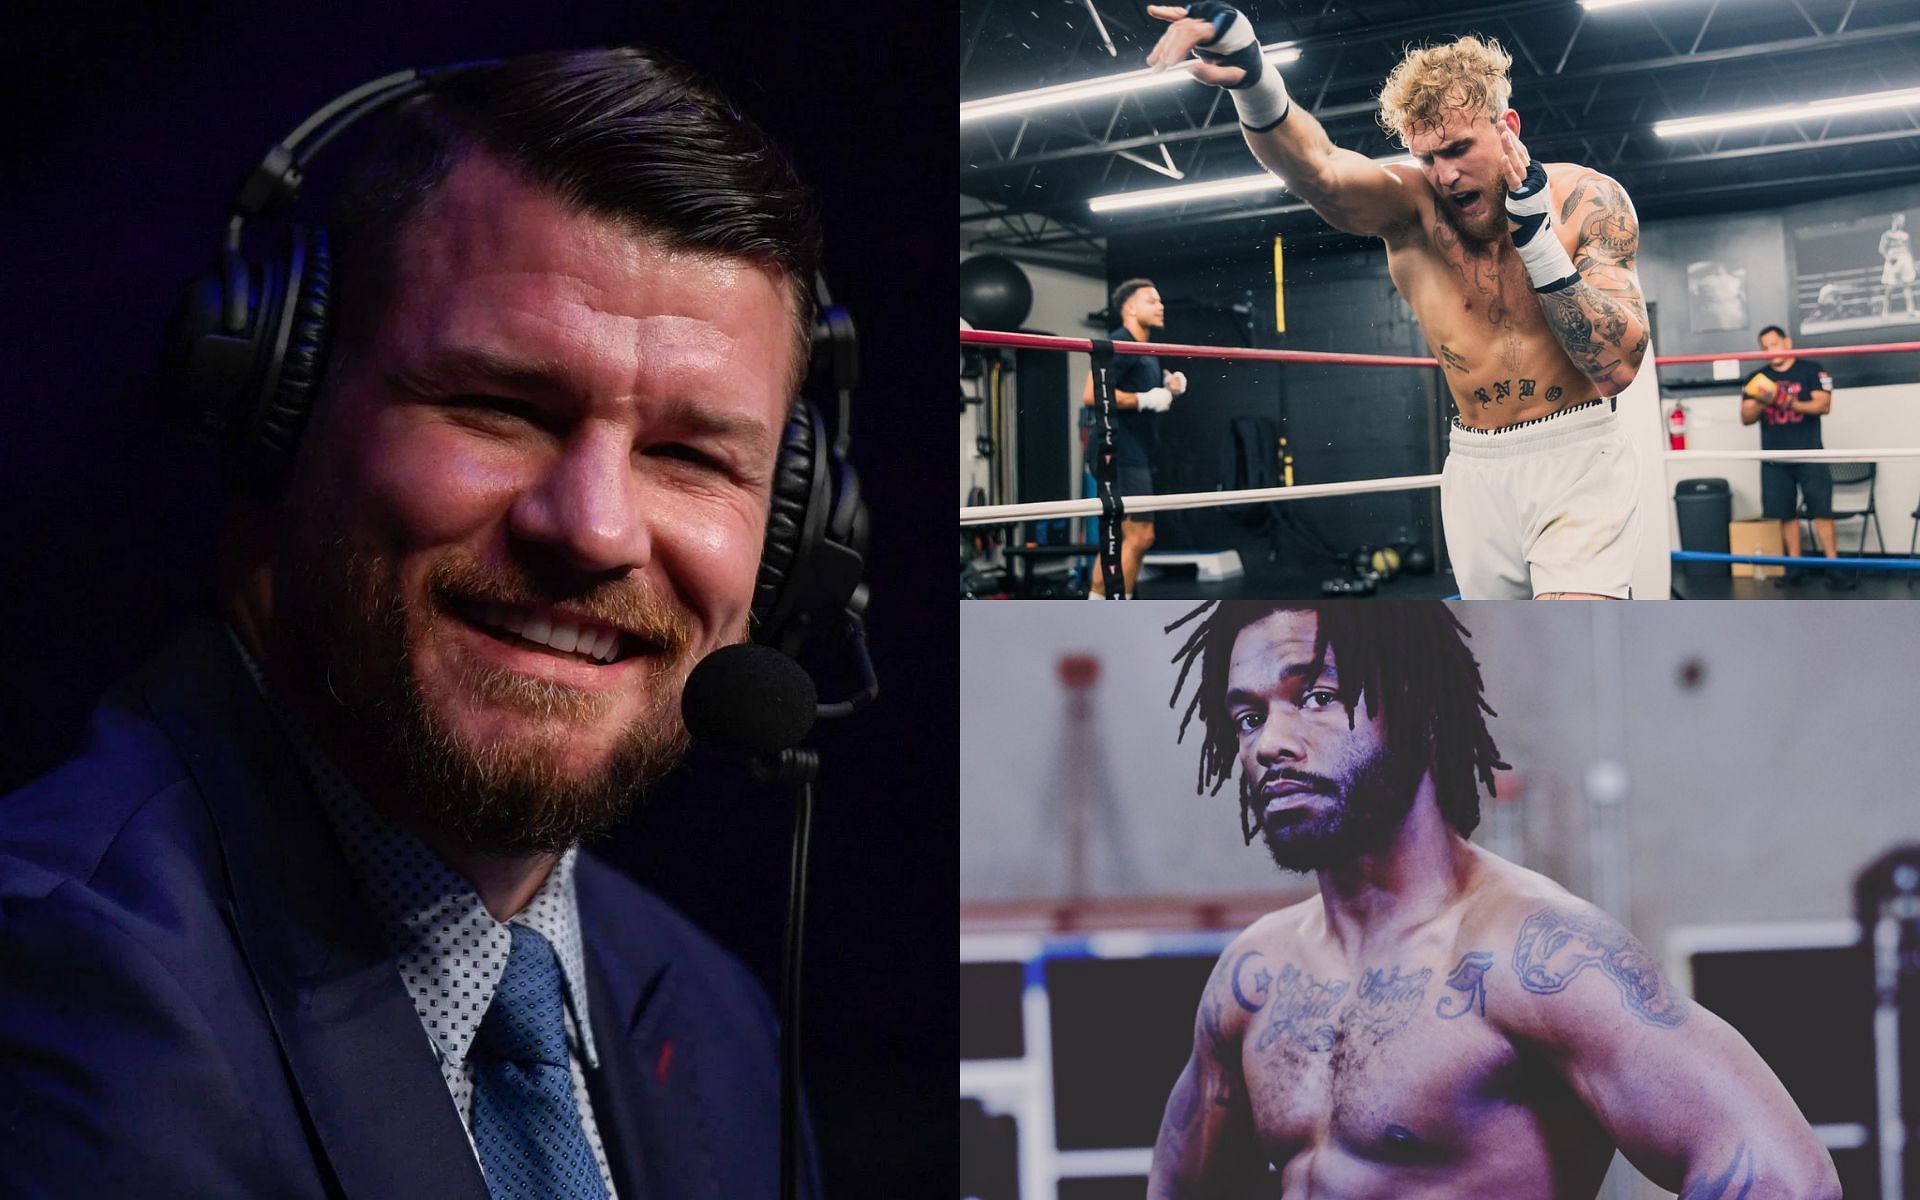 Michael Bisping (left), Jake Paul (top right), and Hasim Rahman Jr. (bottom right) [Images courtesy of Getty, @jakepaul Twitter and @_HasimRahmanJr Twitter]